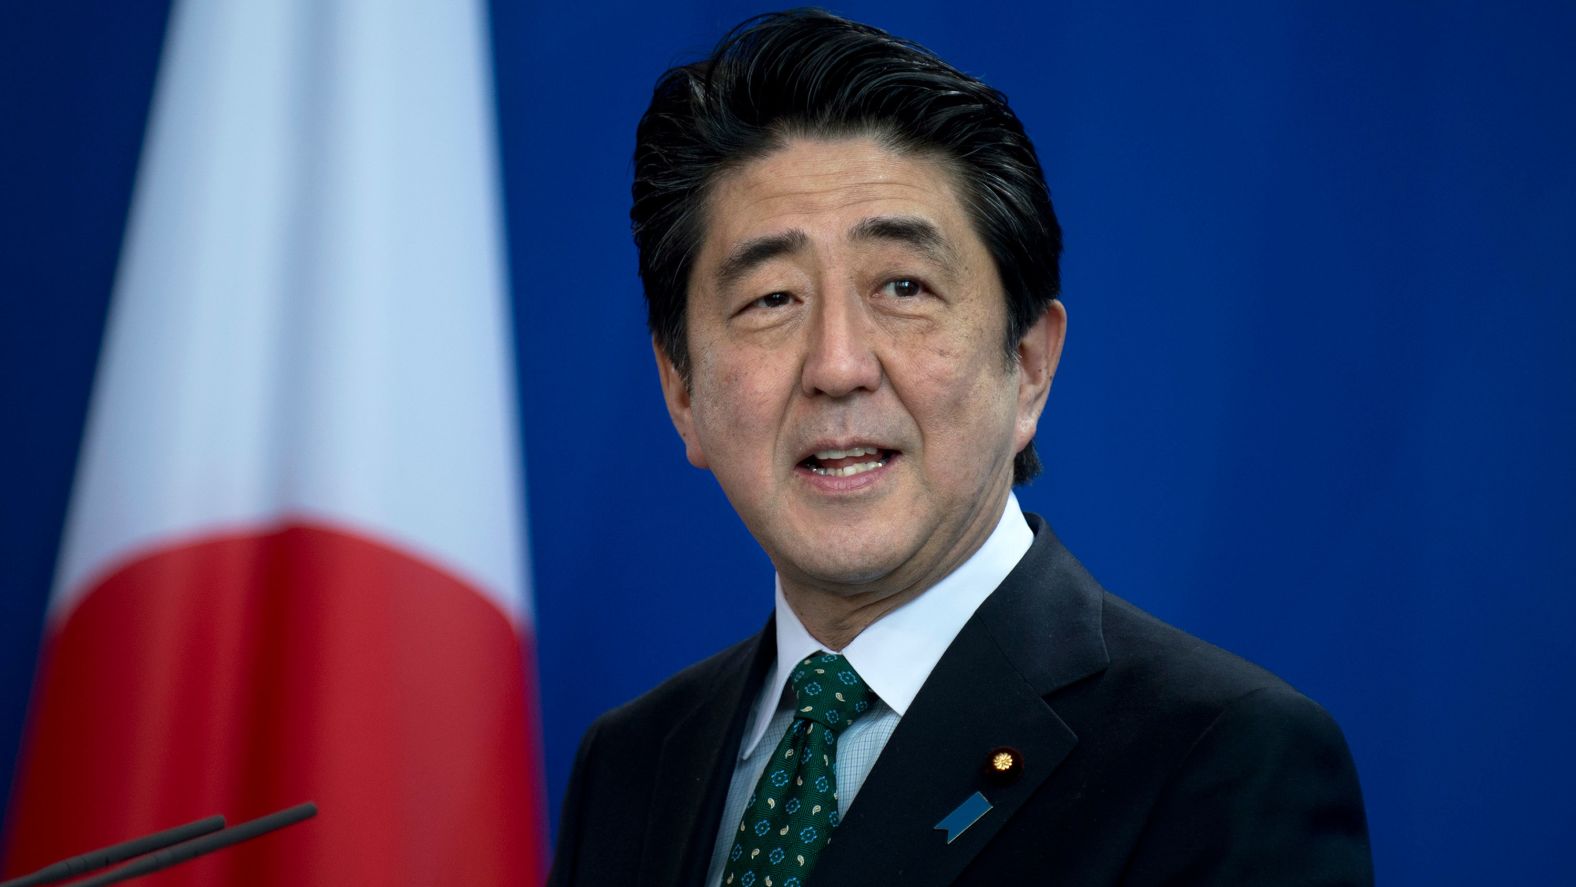 Former Japanese Prime Minister <a href="index.php?page=&url=https%3A%2F%2Fwww.cnn.com%2F2022%2F07%2F08%2Fasia%2Fjapan-shinzo-abe-dies-shooting-intl-hnk%2Findex.html" target="_blank">Shinzo Abe</a> was fatally shot on July 8 while giving a speech on a street in Nara, Japan. Abe, 67, was Japan's longest-serving prime minister, holding office from 2006 to 2007 and again from 2012 to 2020 before resigning due to health reasons.